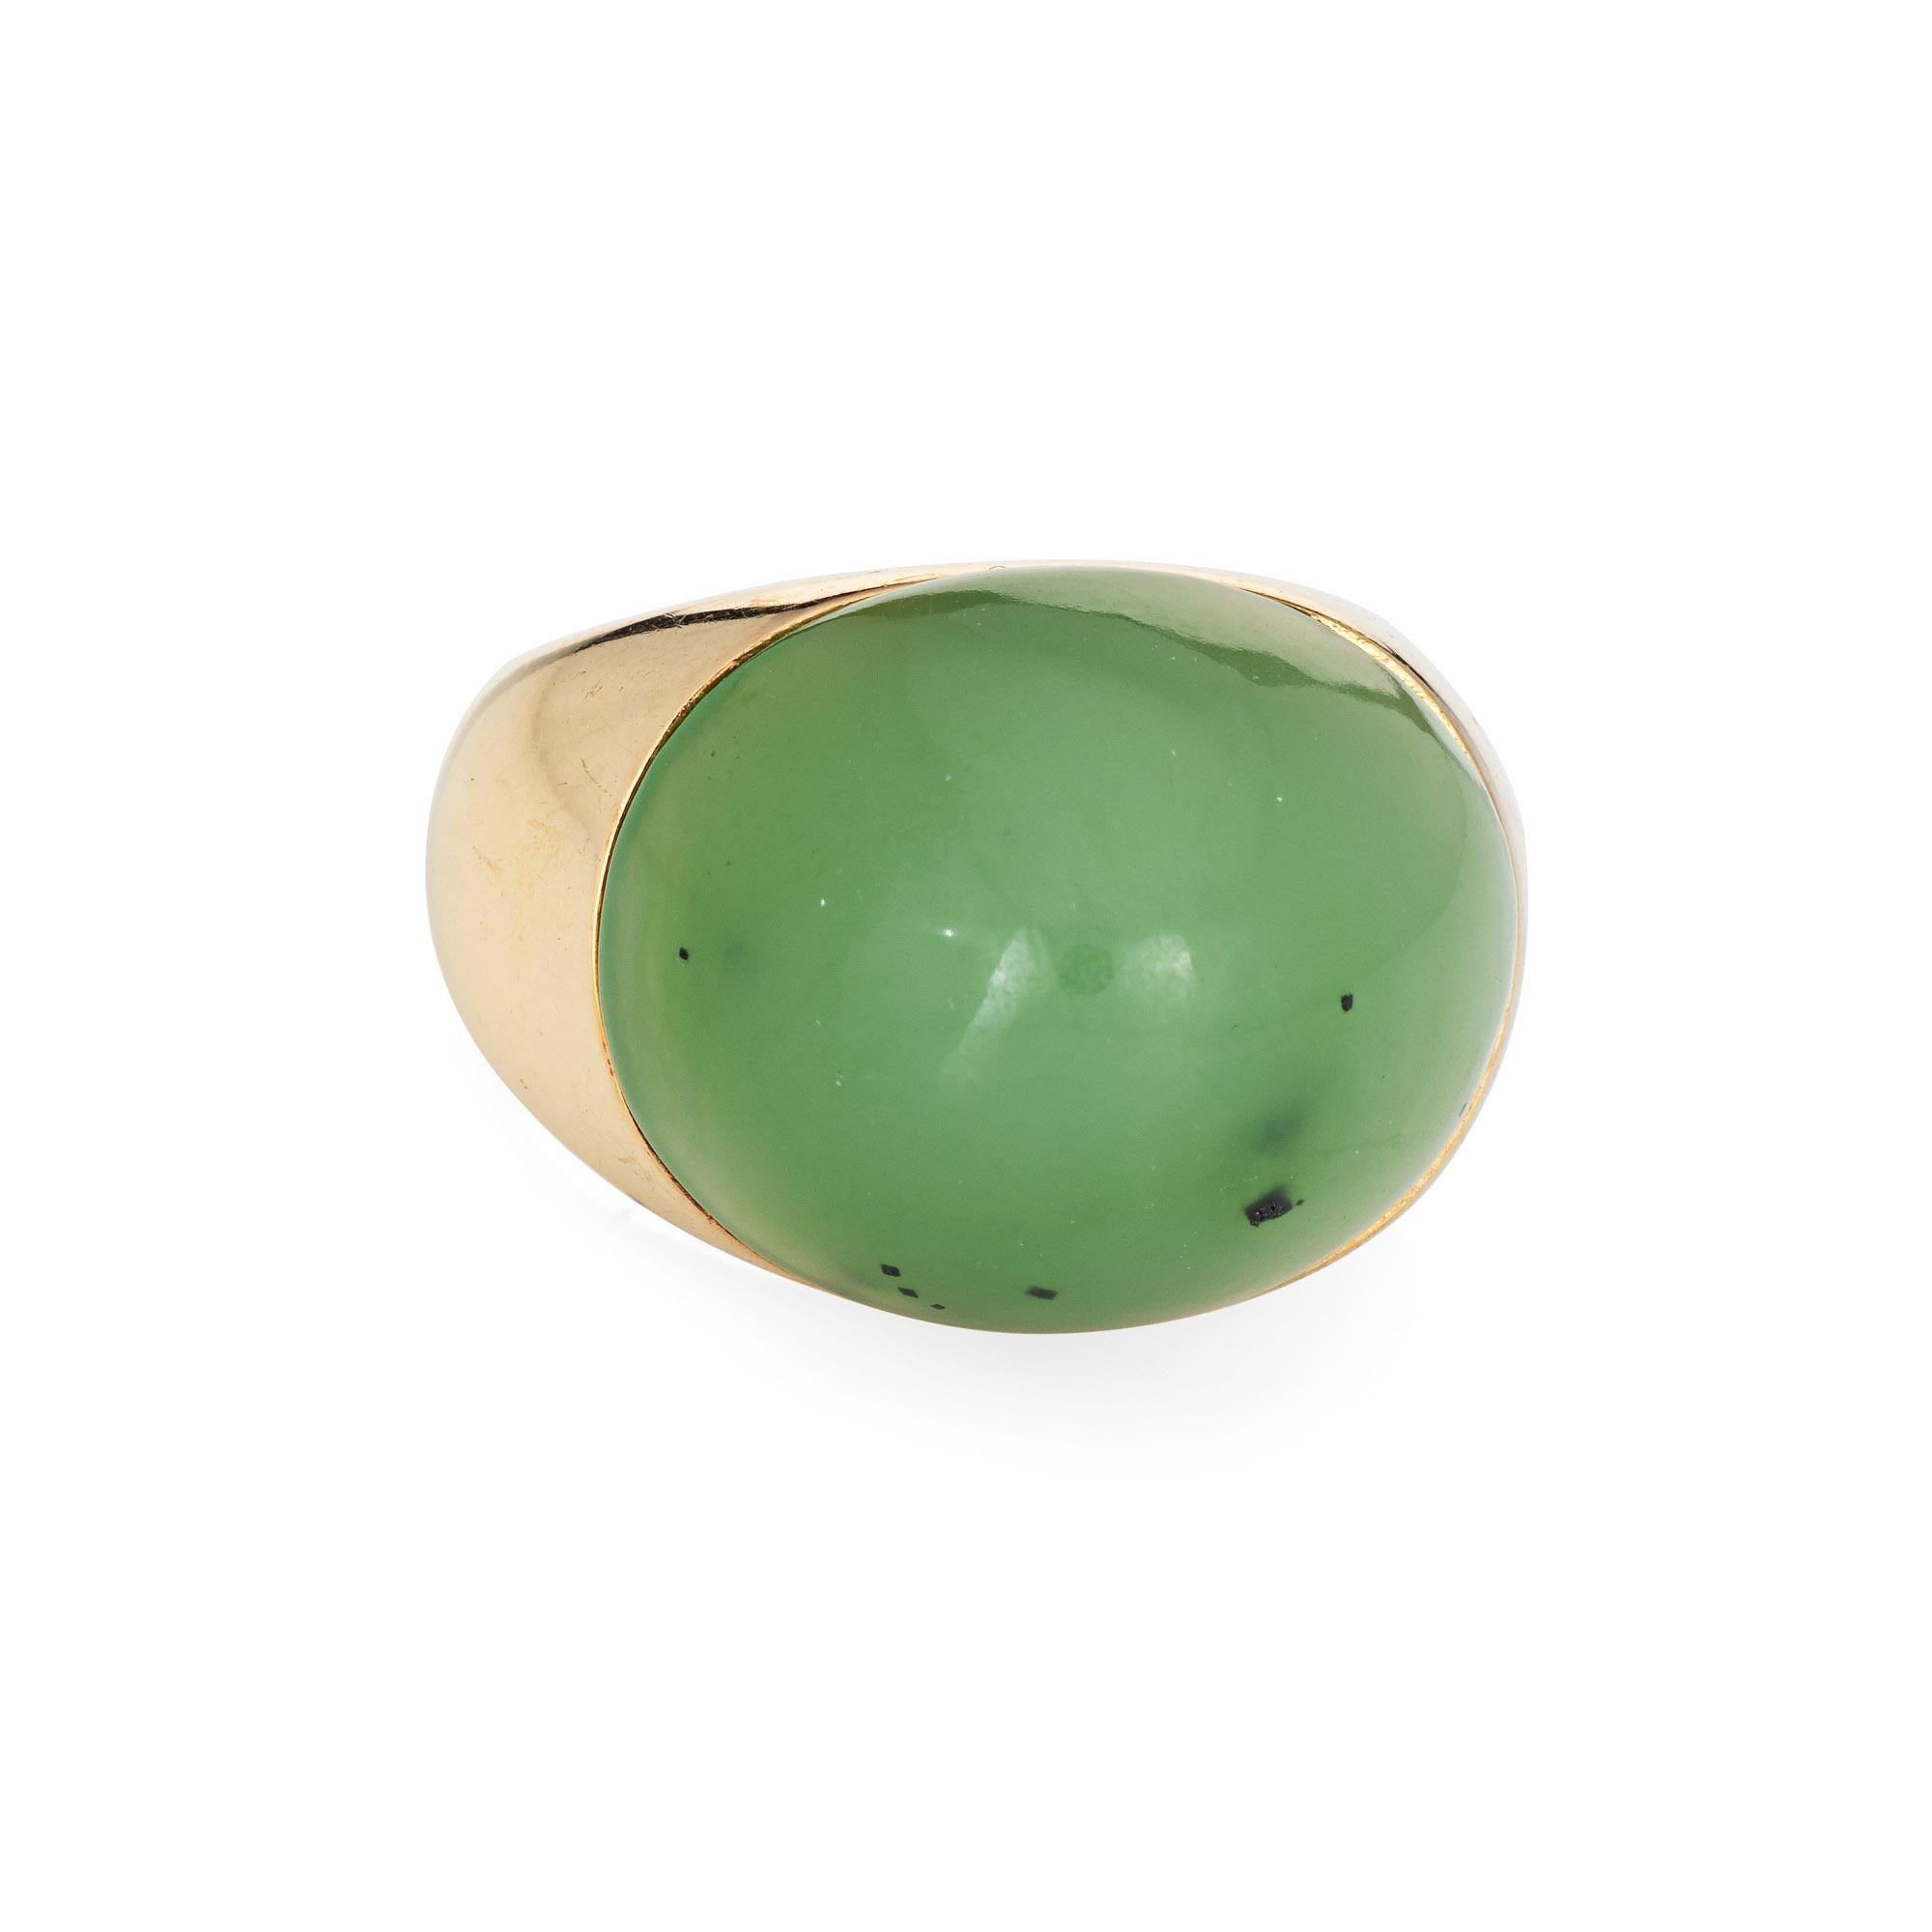 Stylish vintage jade ring (circa 1970s to 1980s) crafted in 14 karat yellow gold. 

Cabochon cut nephrite jade measures 18mm x 15mm. The jade is in very good condition and free or cracks or chips.   

The jade is cabochon cut in a pointed dome and